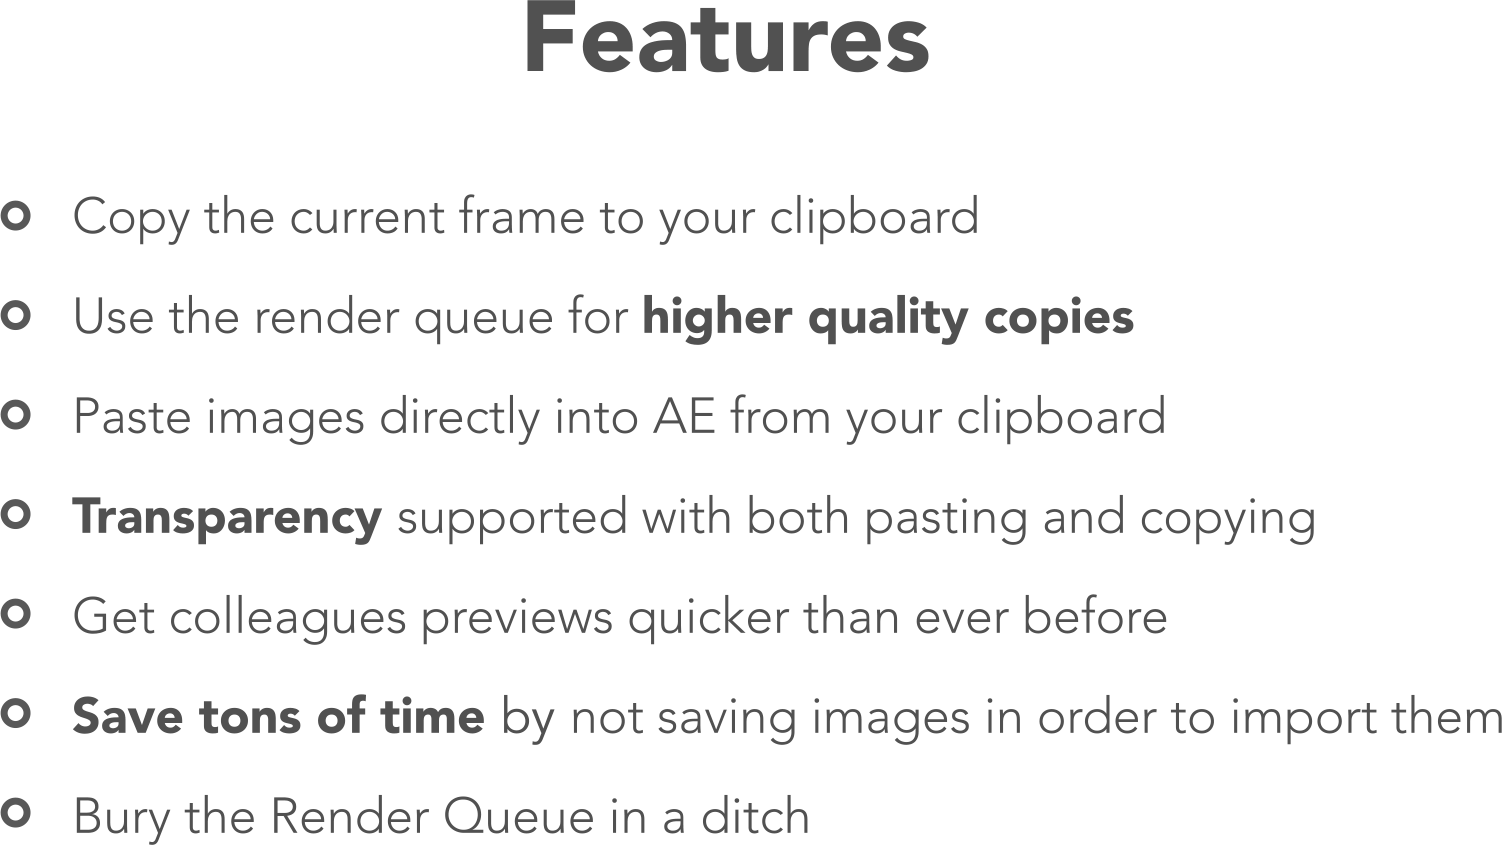 Features: Copy the current frame to your clipboard, use the render queue
        for higher quality copies, paste images directly into AE from your clipboard, transparency supported with both pasting and copying, get colleagues
        previews quicker than ever before, save tons of time by not saving images in order to import them, and bury the render queue in a ditch.